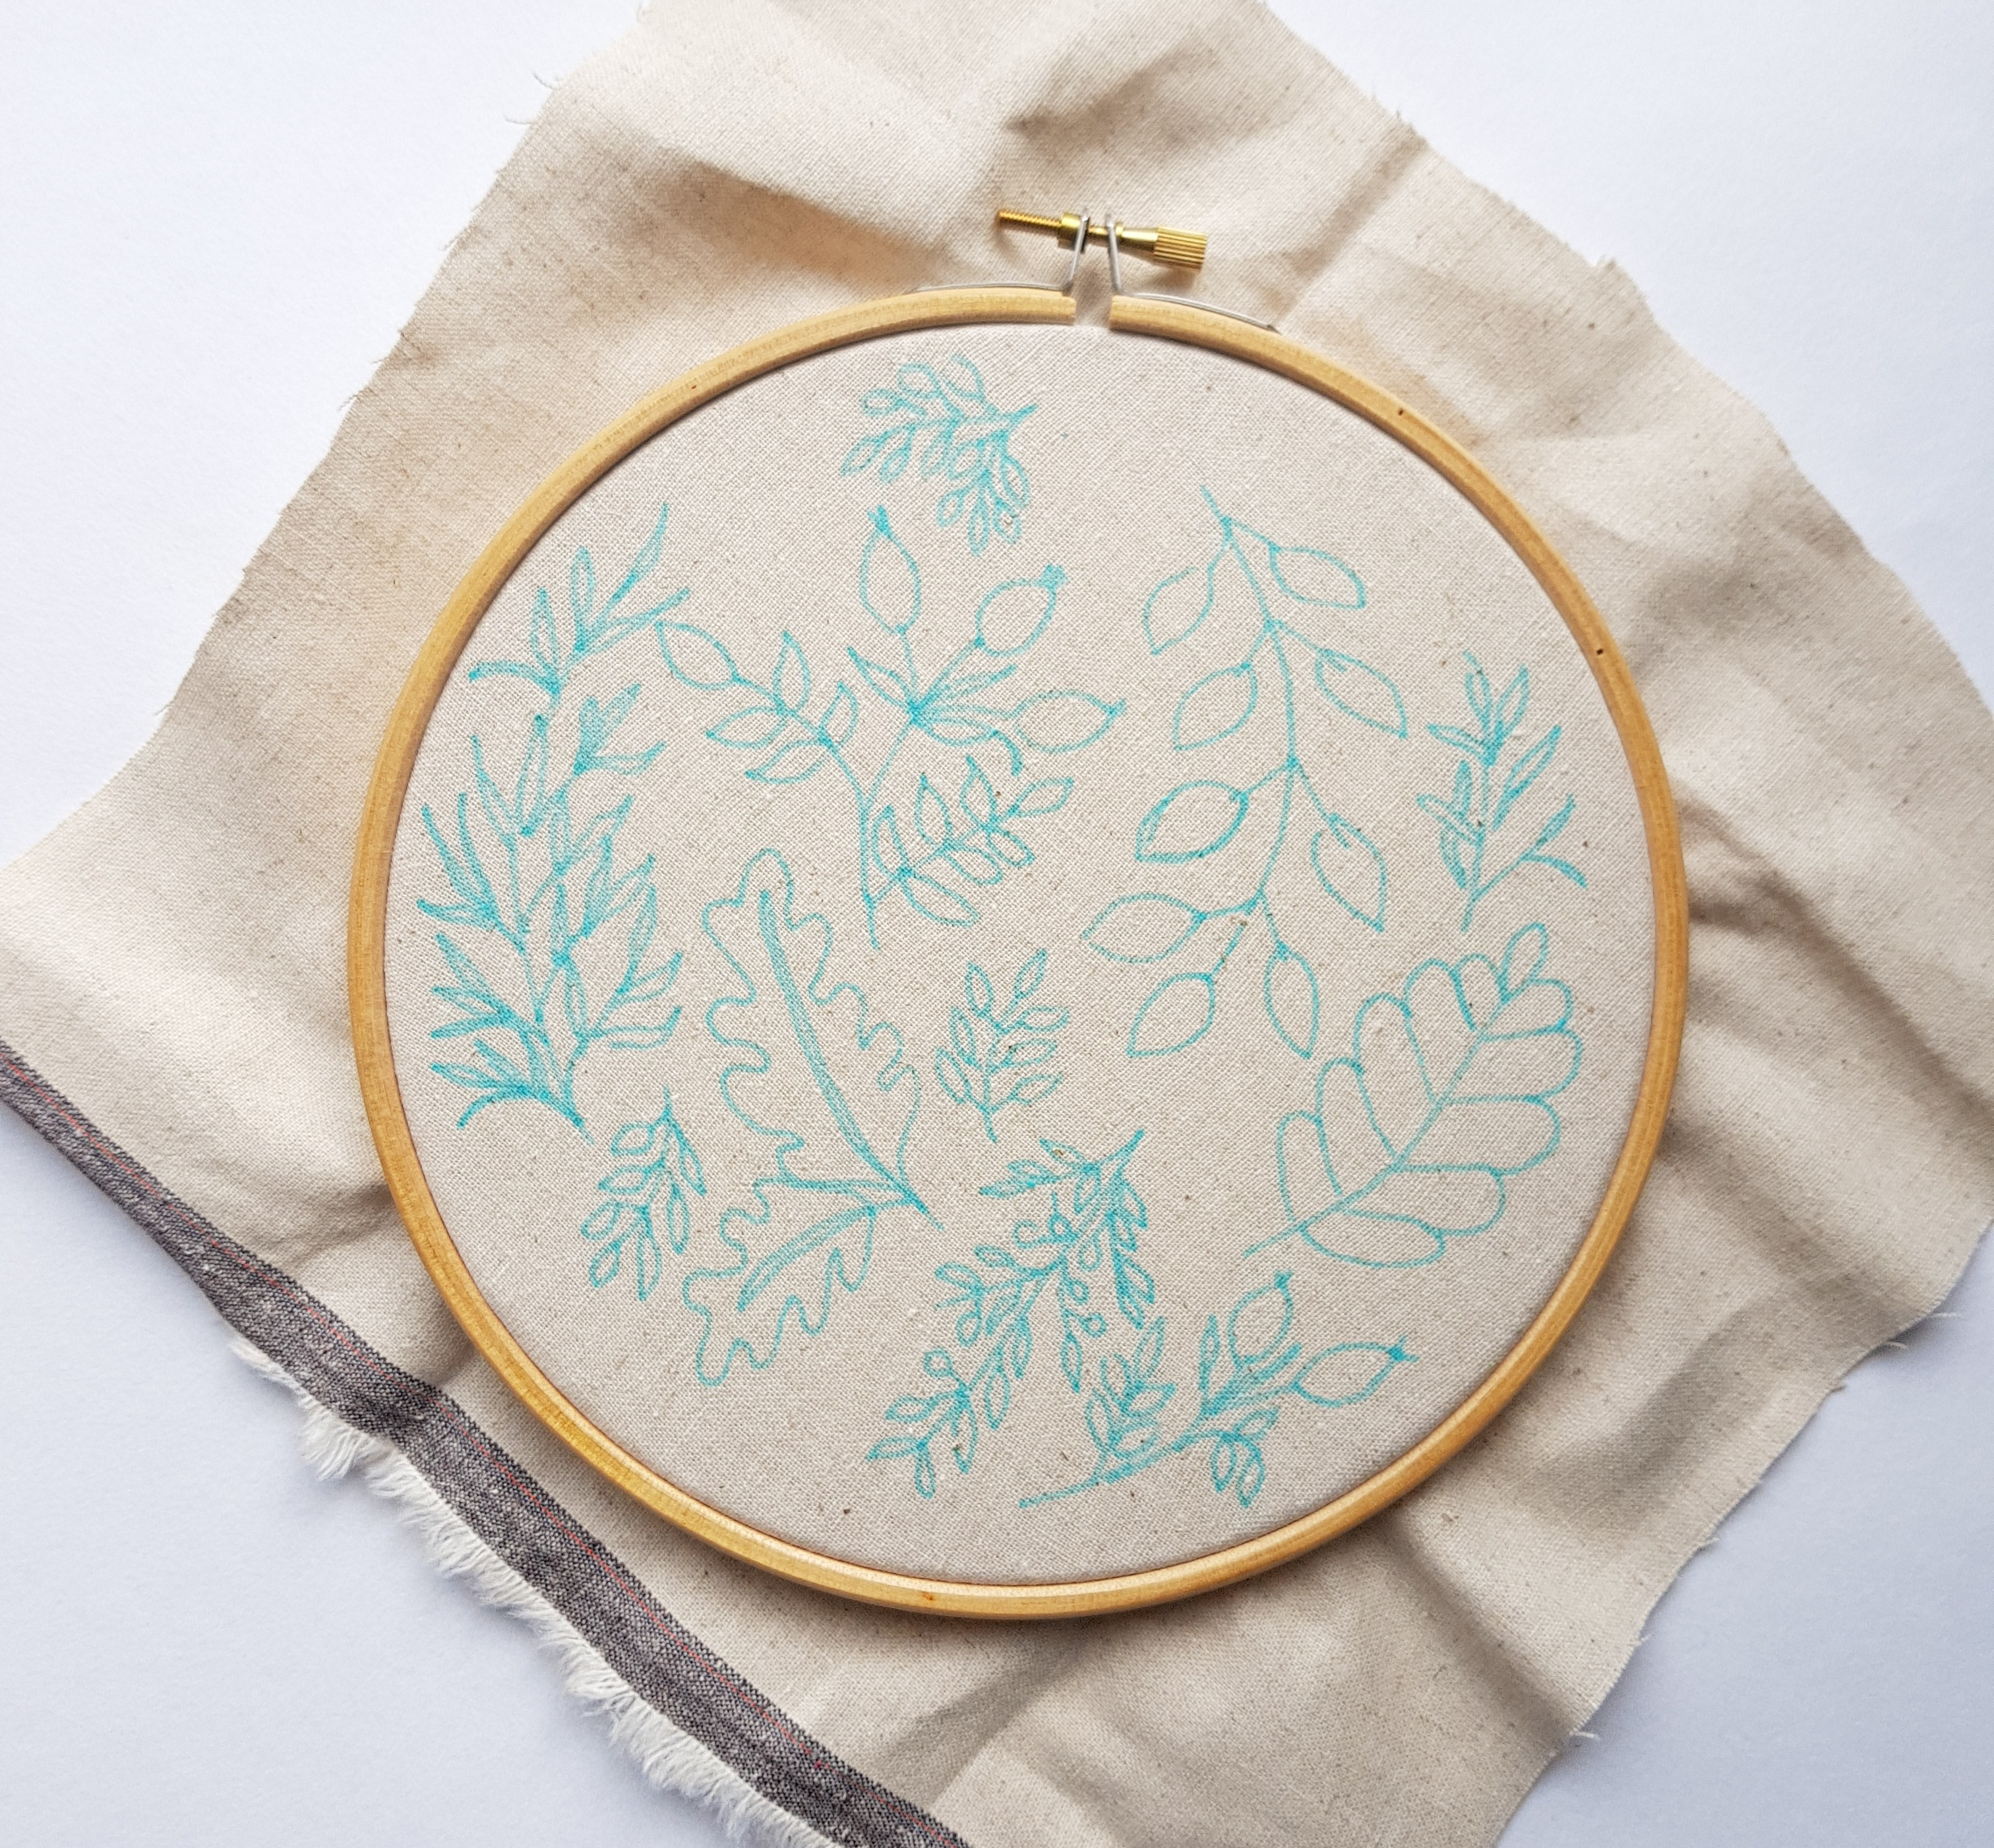 How To Transfer Embroidery Pattern How To Transfer Your Embroidery Pattern On To Fabric Without A